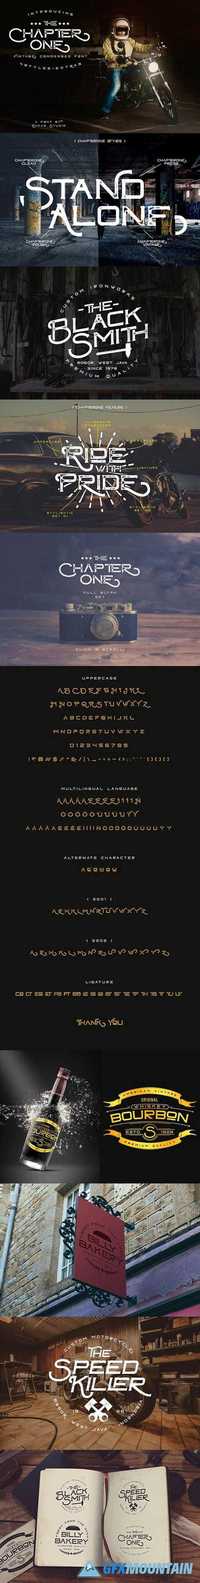 ChapterOne - 4 Font Styles+Extras 1279468